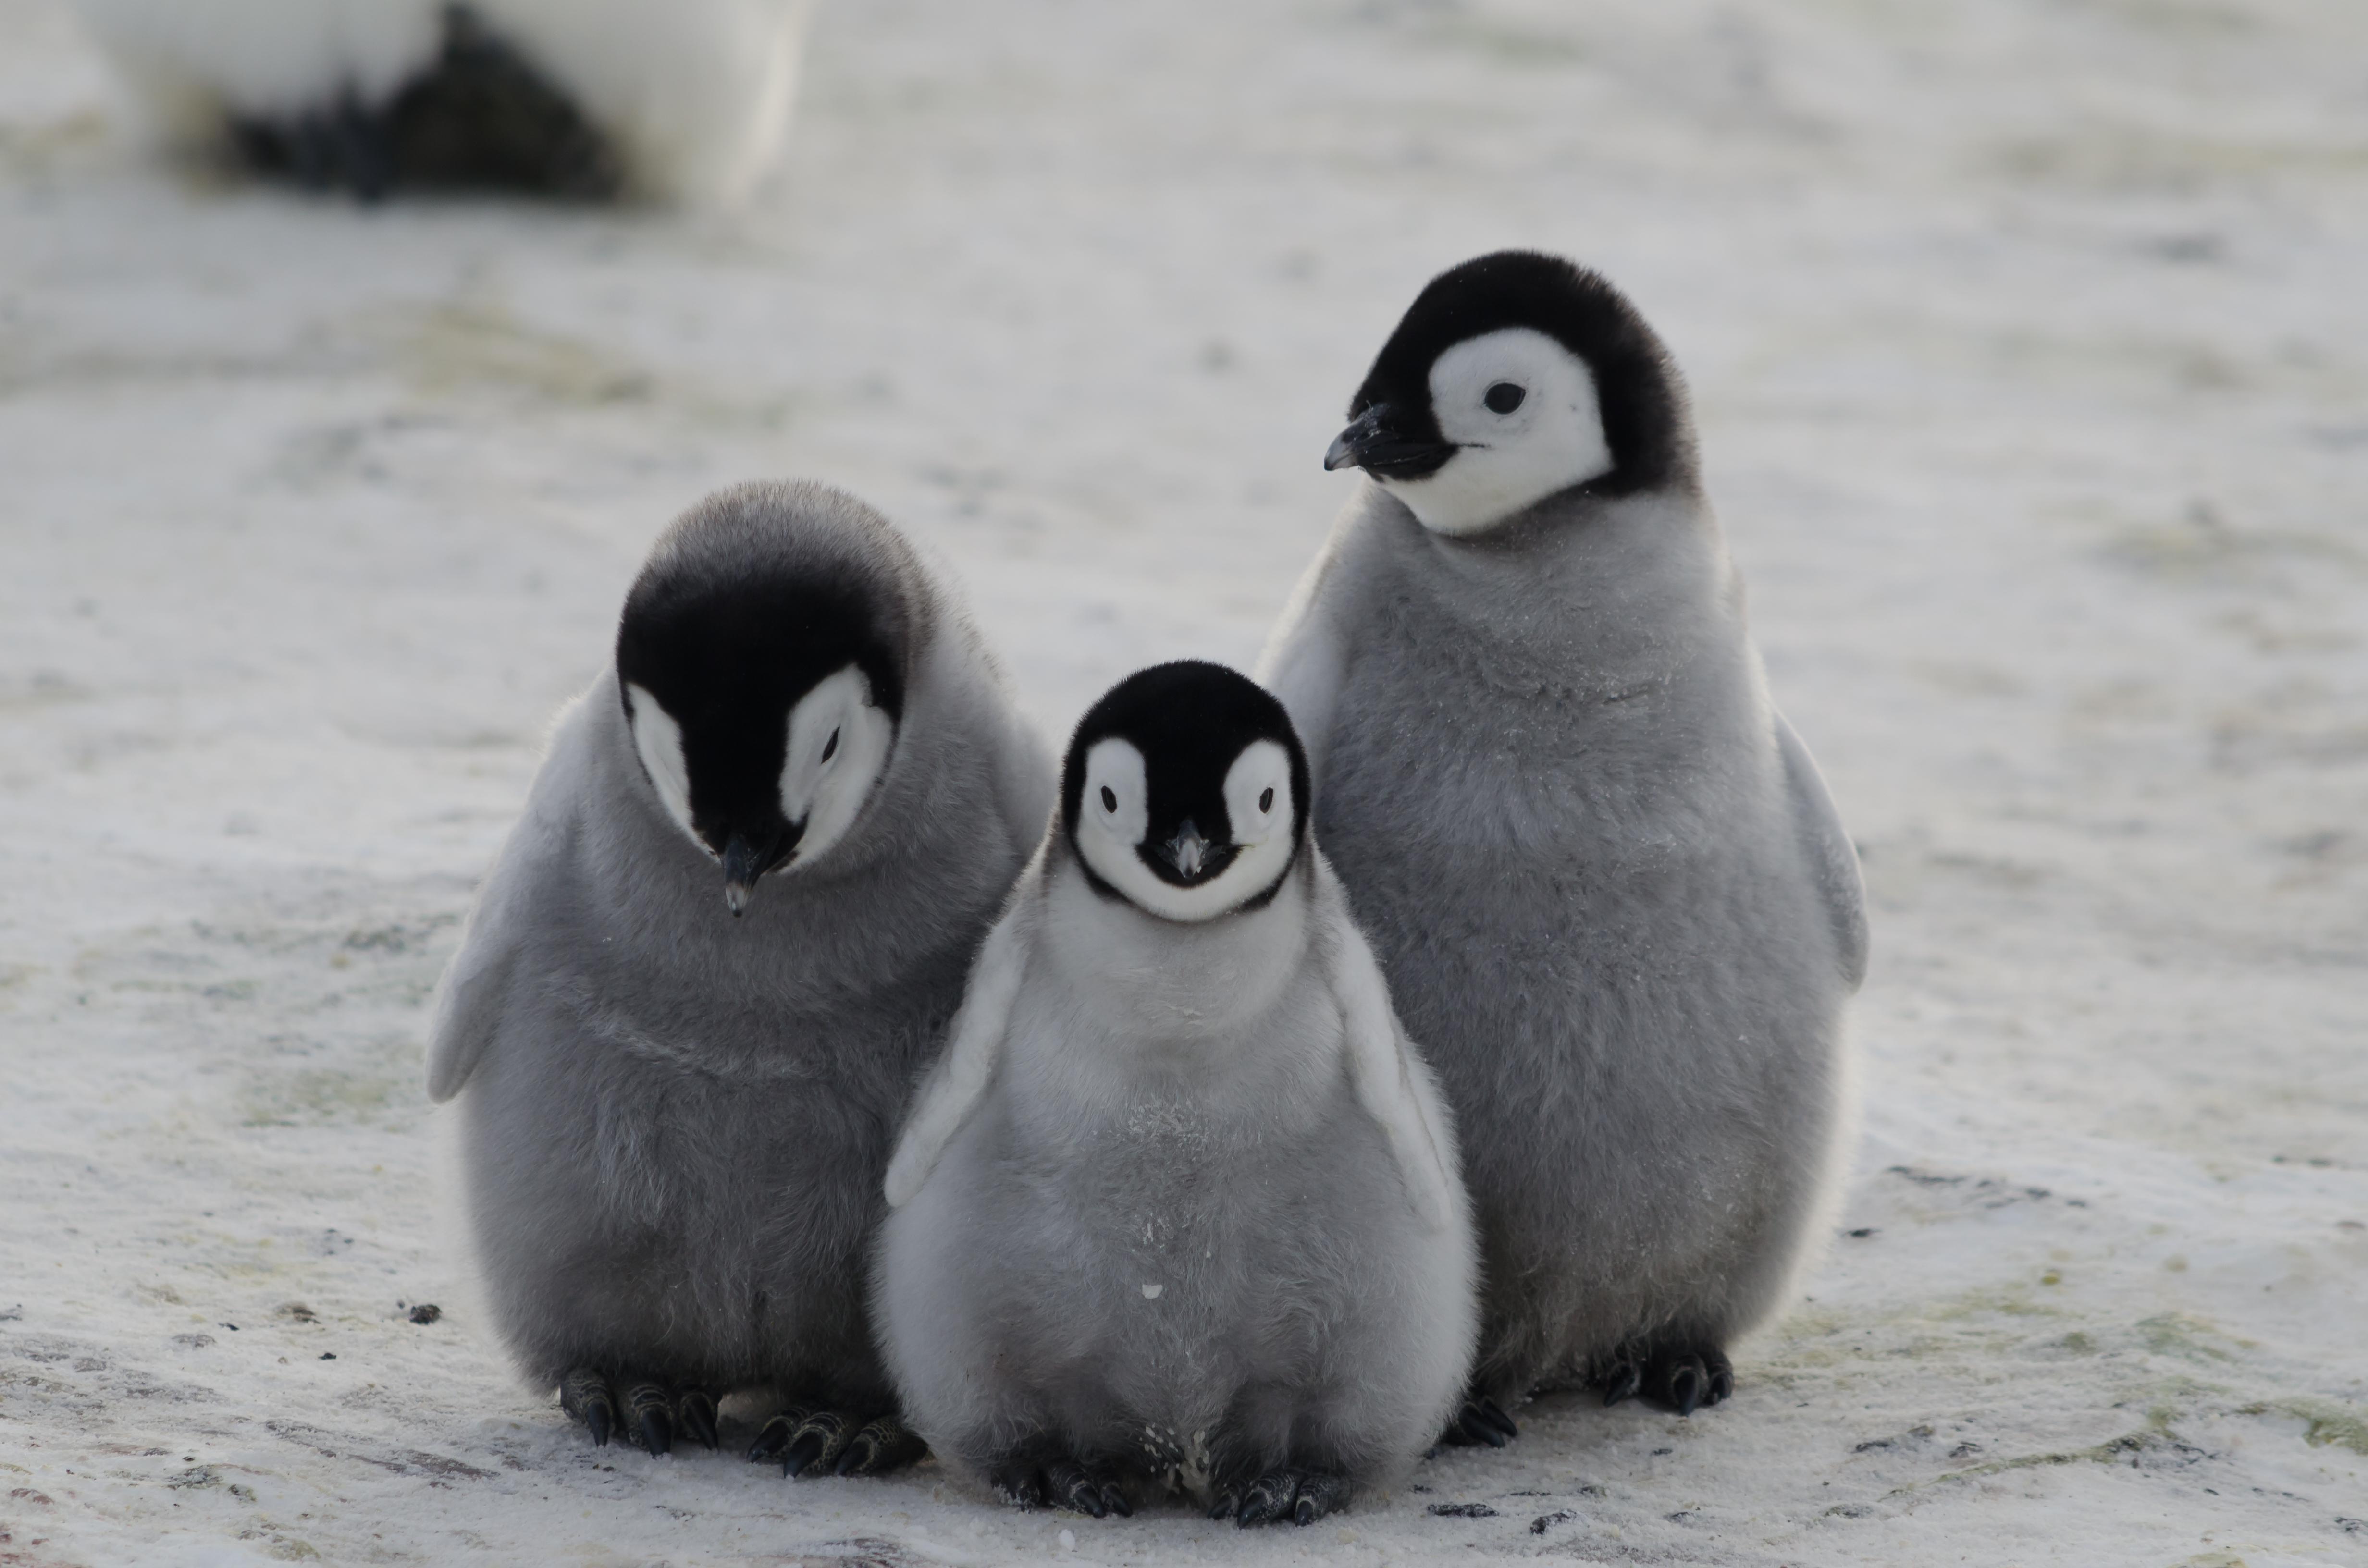 Penguin chicks stands on an icy ground